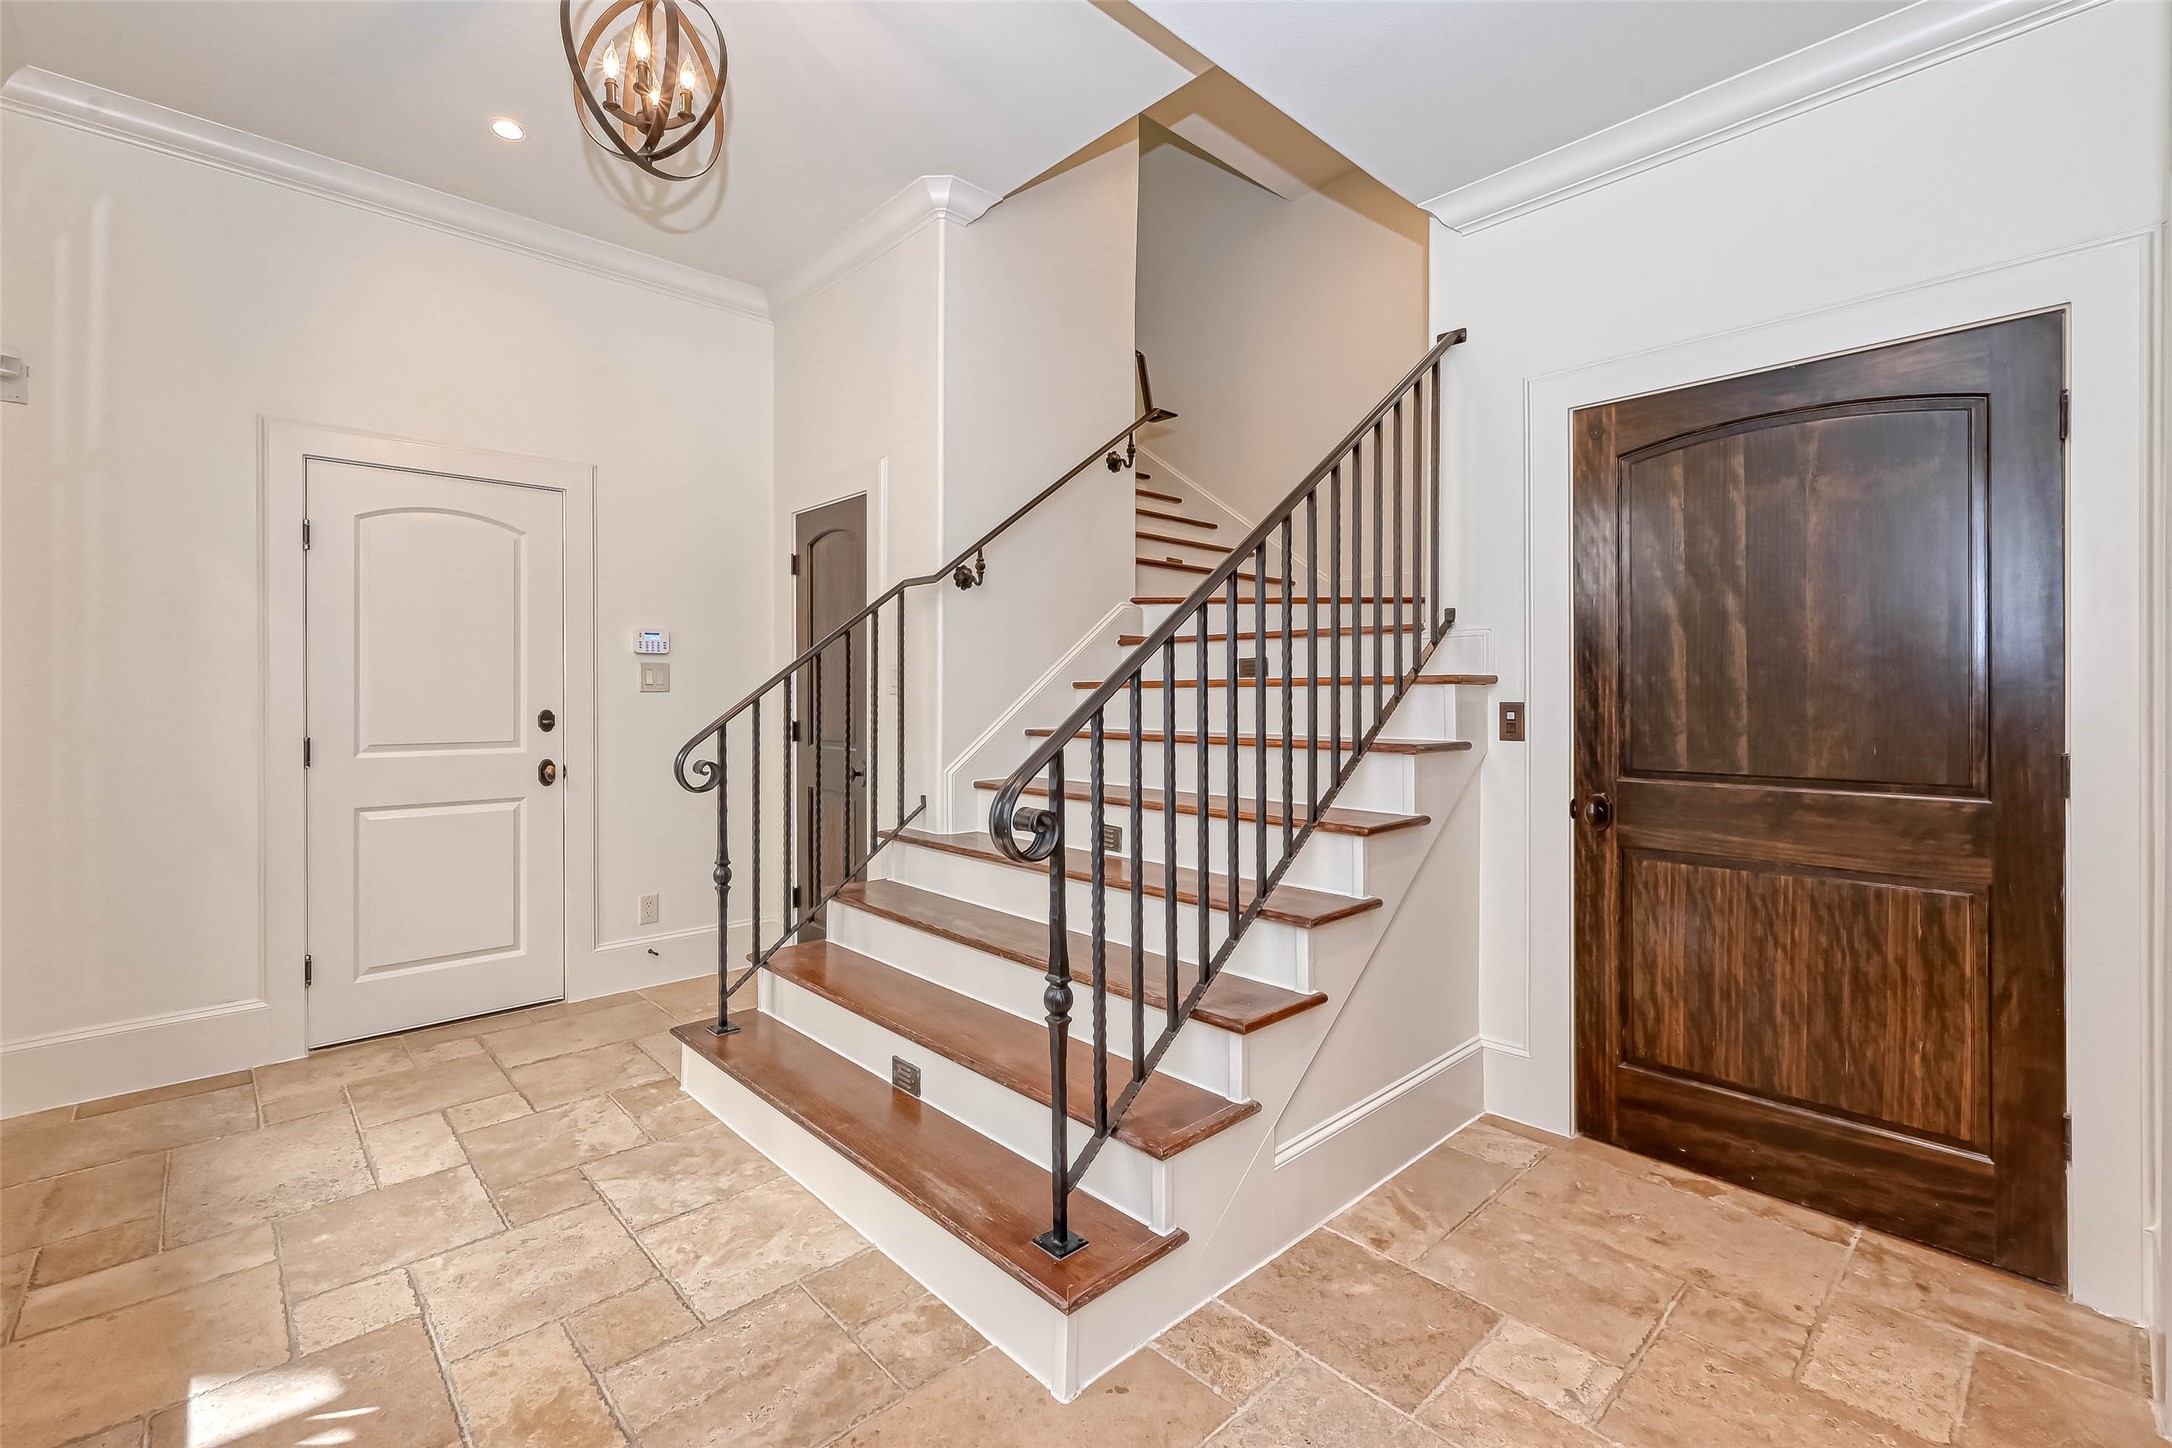 Entry with tile flooring, brown door is the featured elevator for this home. Note the stairs have lighting on the steps for safety and a pretty look.